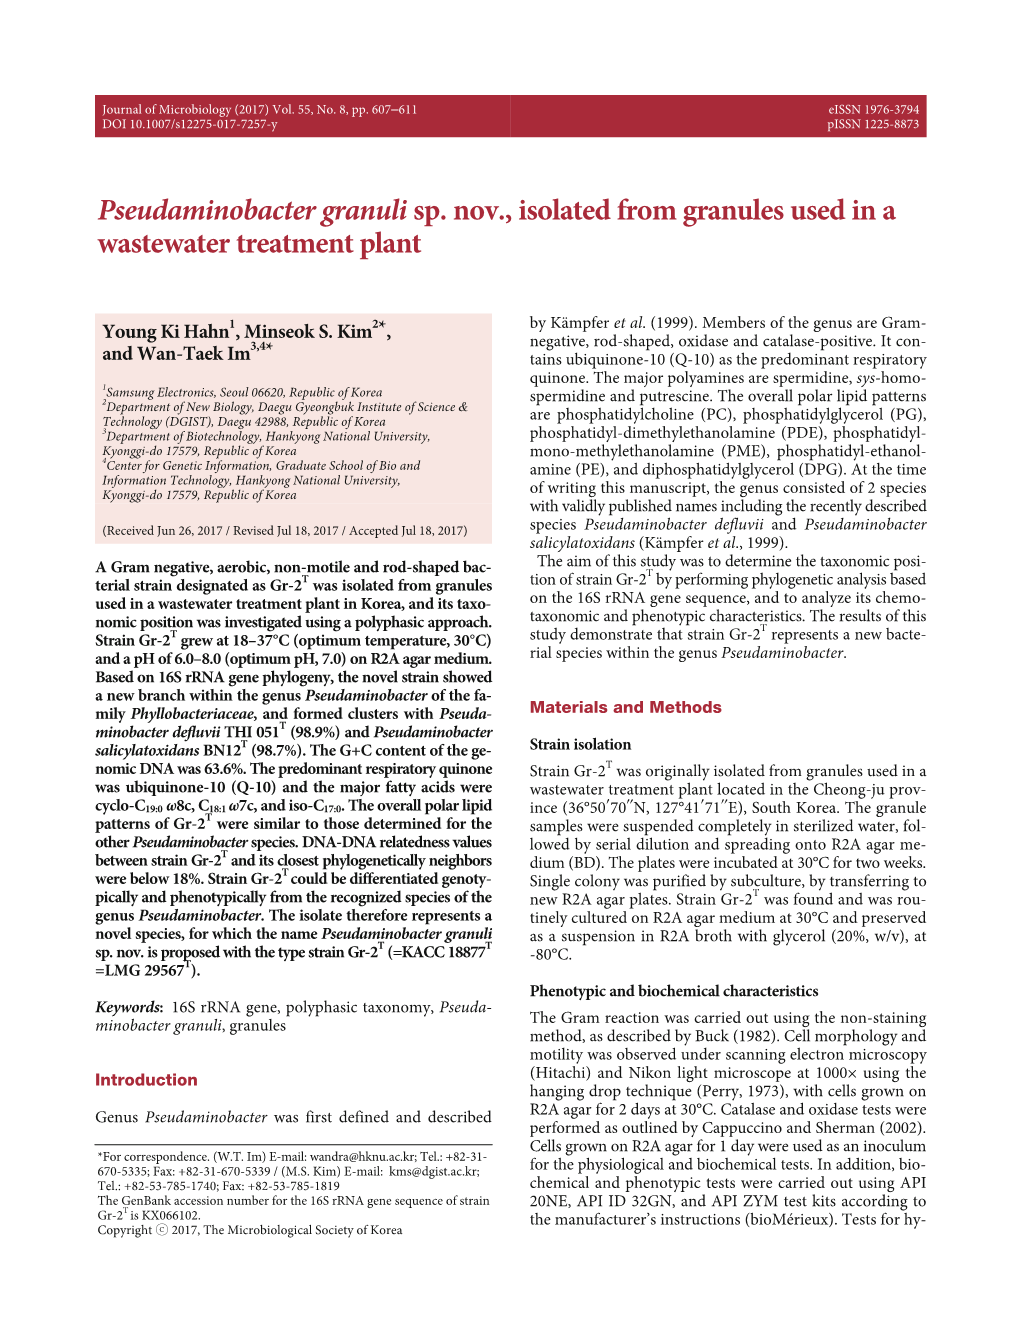 Pseudaminobacter Granuli Sp. Nov., Isolated from Granules Used in a Wastewater Treatment Plant